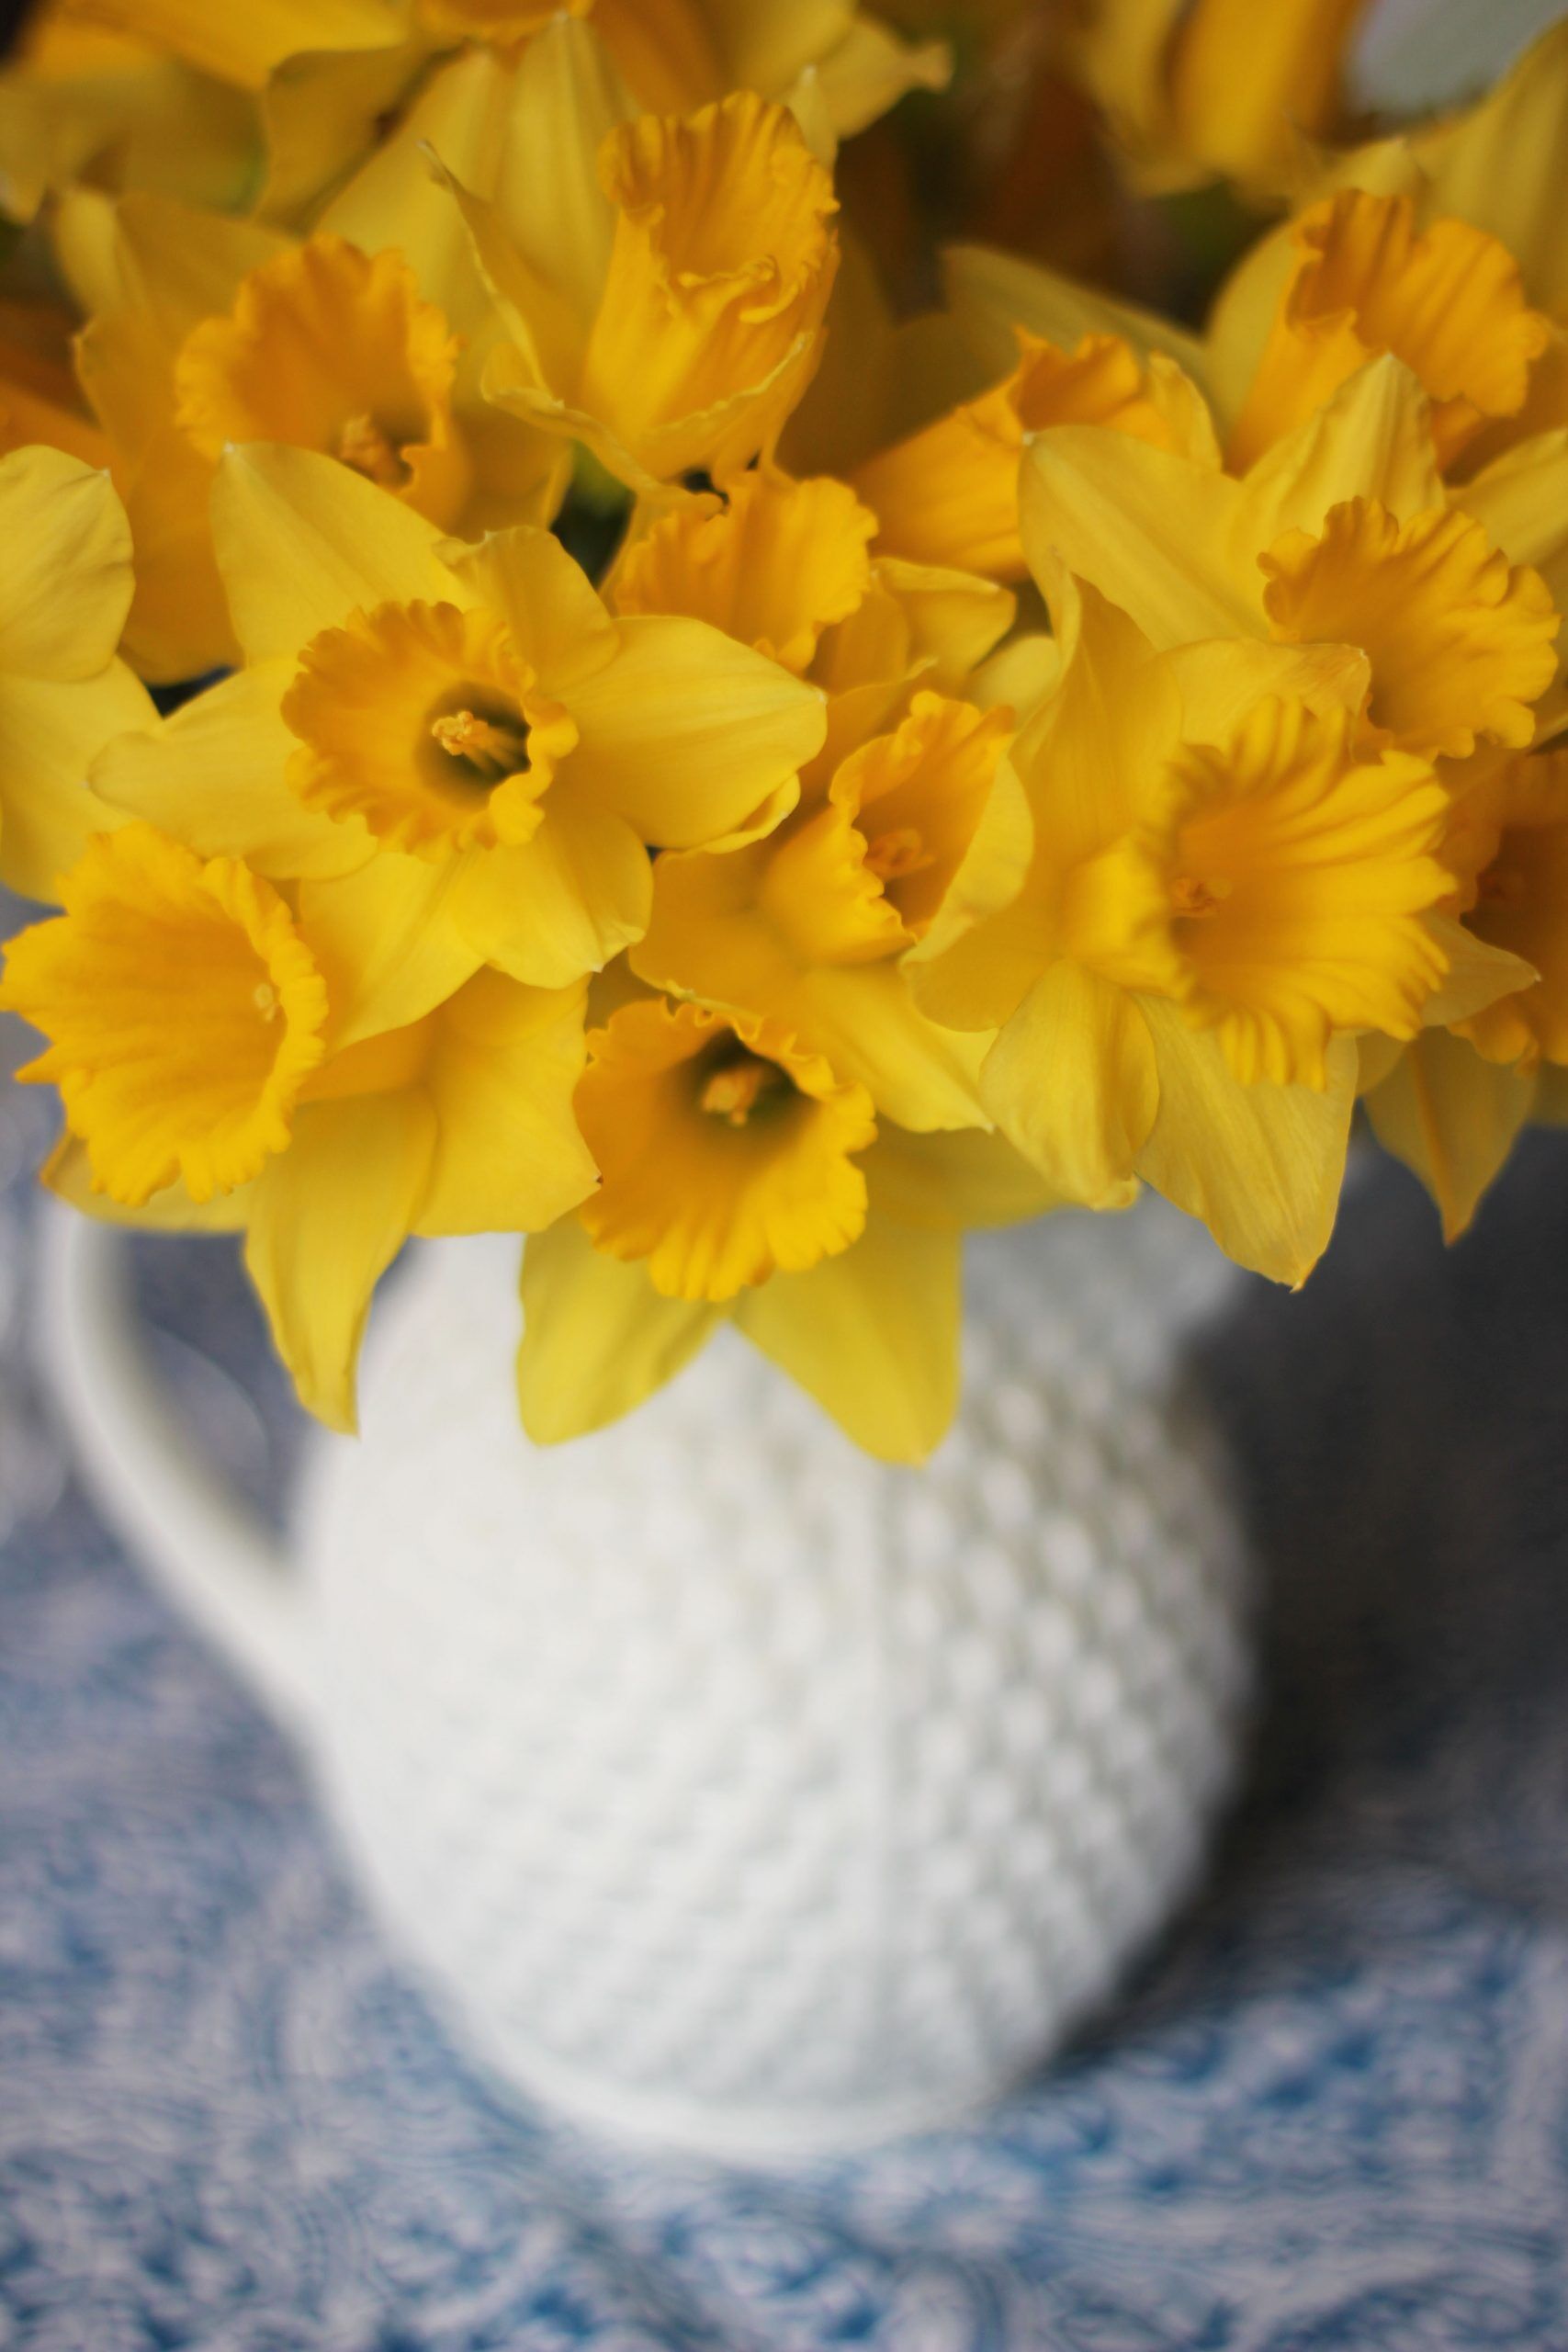 Yellow daffodils in a white vase brighten up the dinner table